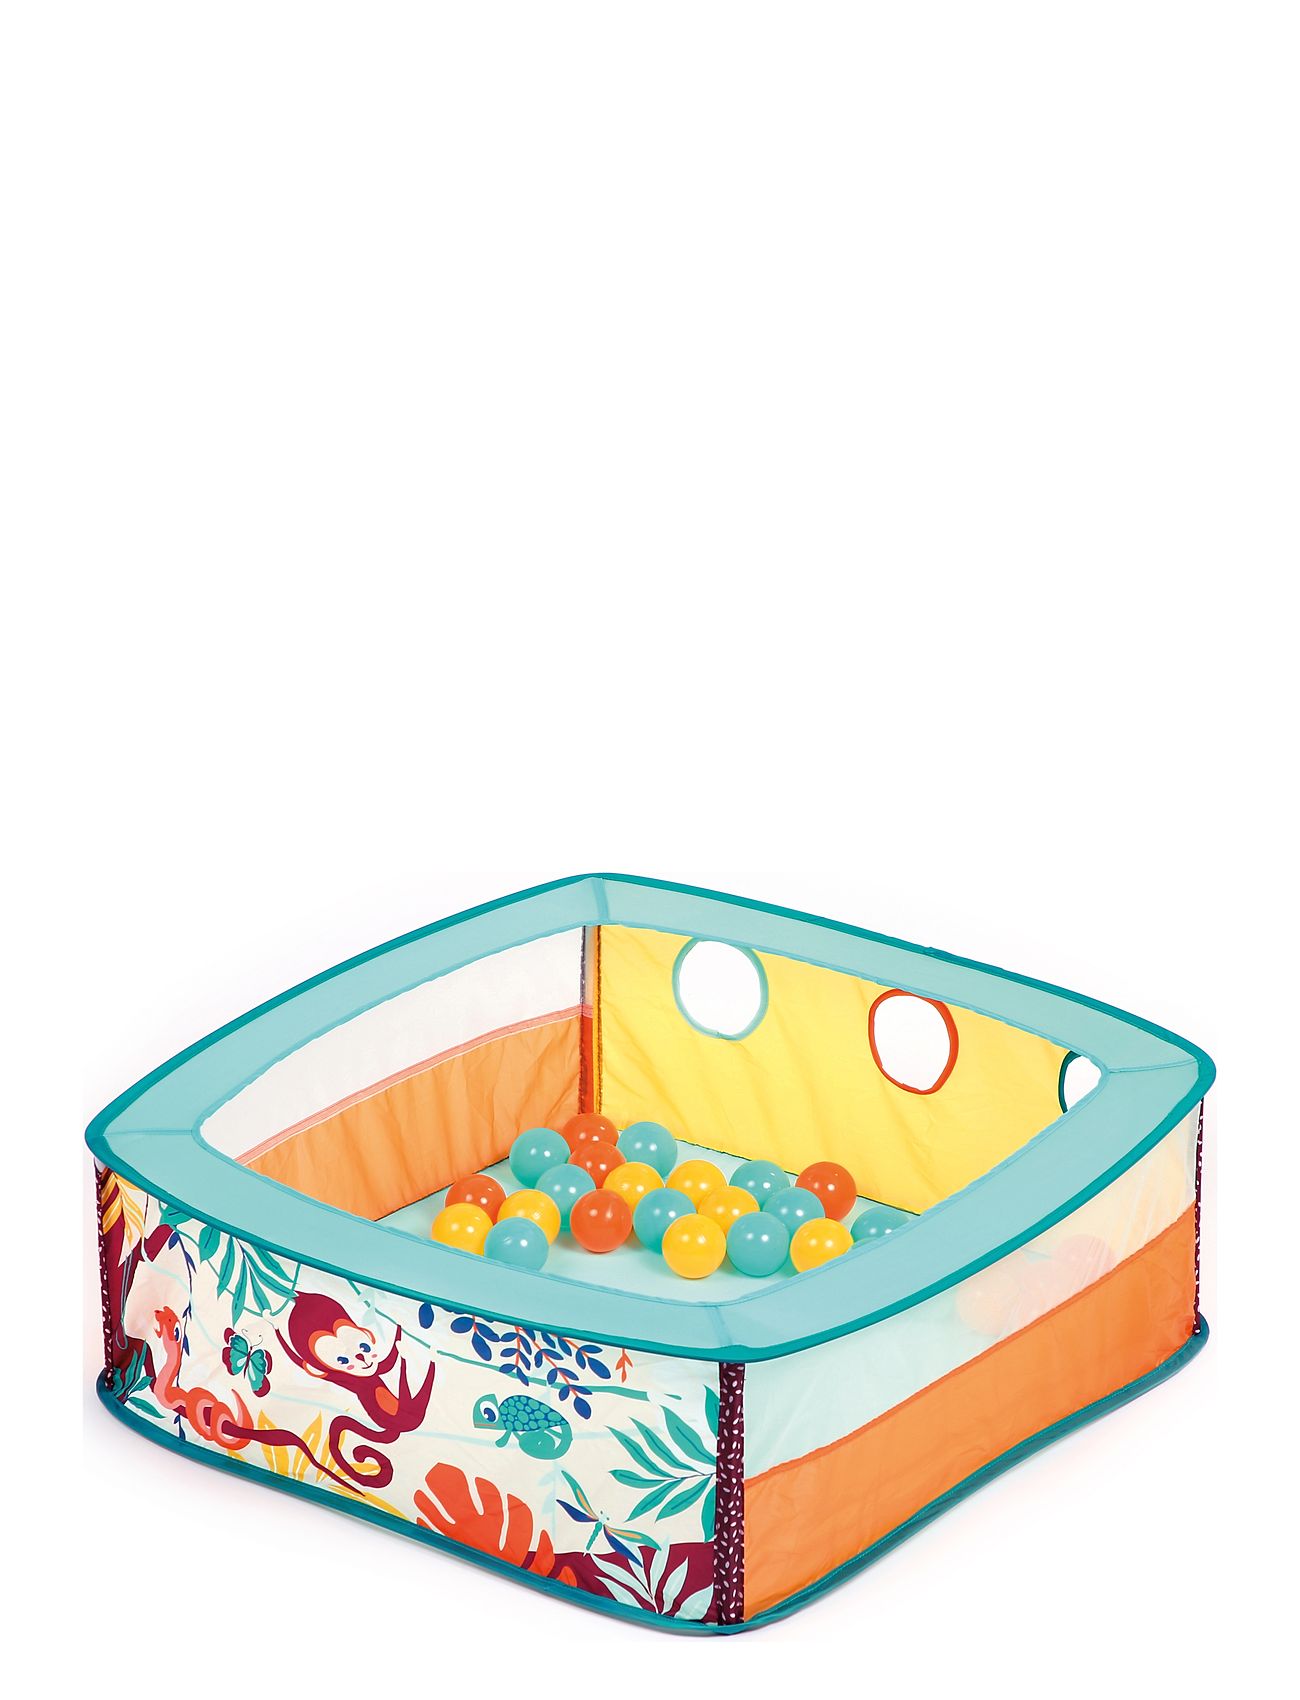 Playpen With Balls - Jungle Toys Baby Toys Educational Toys Activity Toys Multi/patterned Ludi